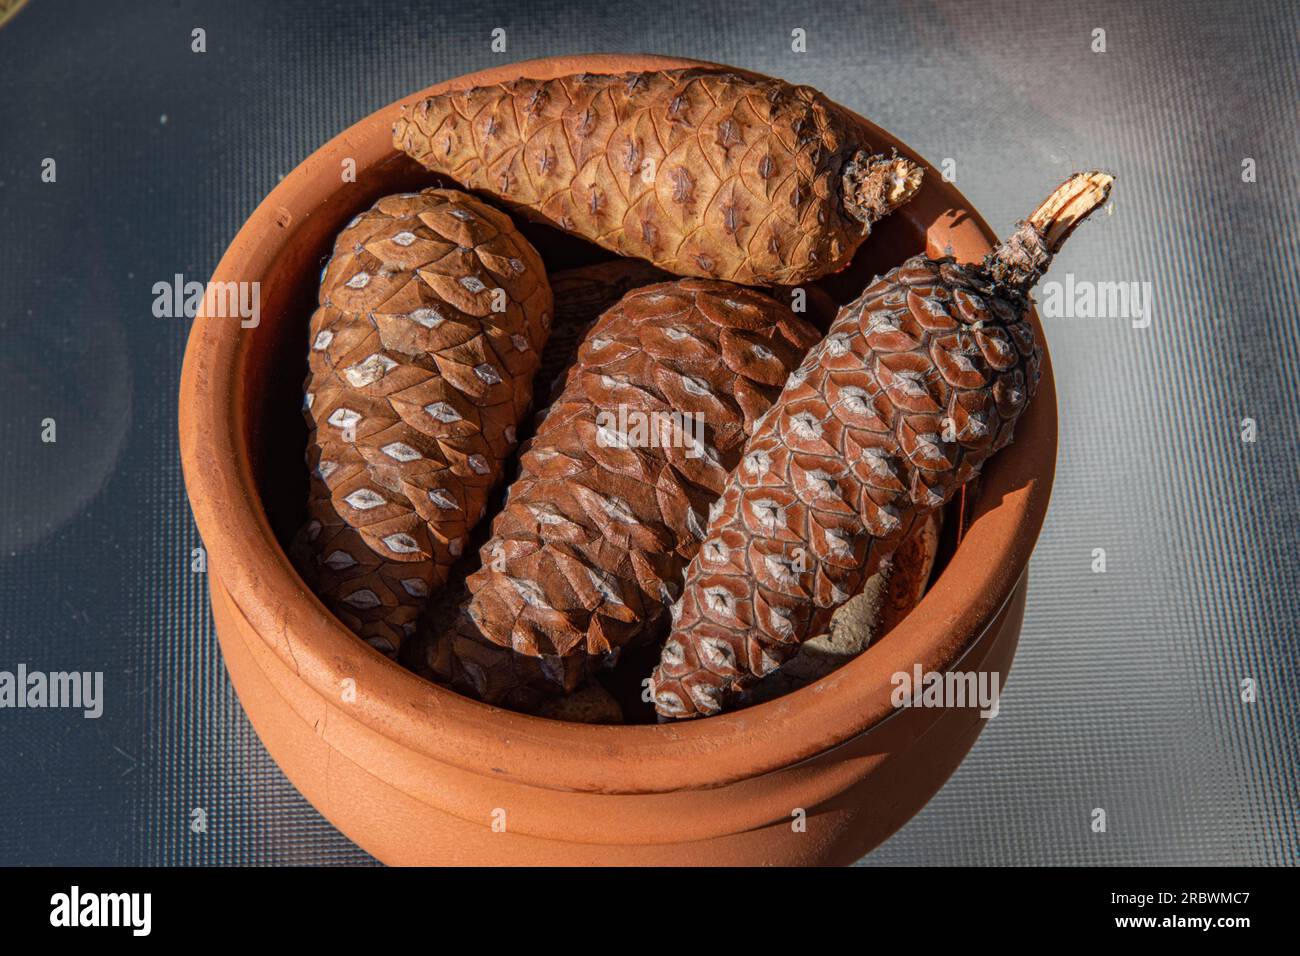 Closeup small wooden pine cones in clay pot isolated on empty table. Natural pine cones of conifer tree. Coniferous pine cones still life Stock Photo